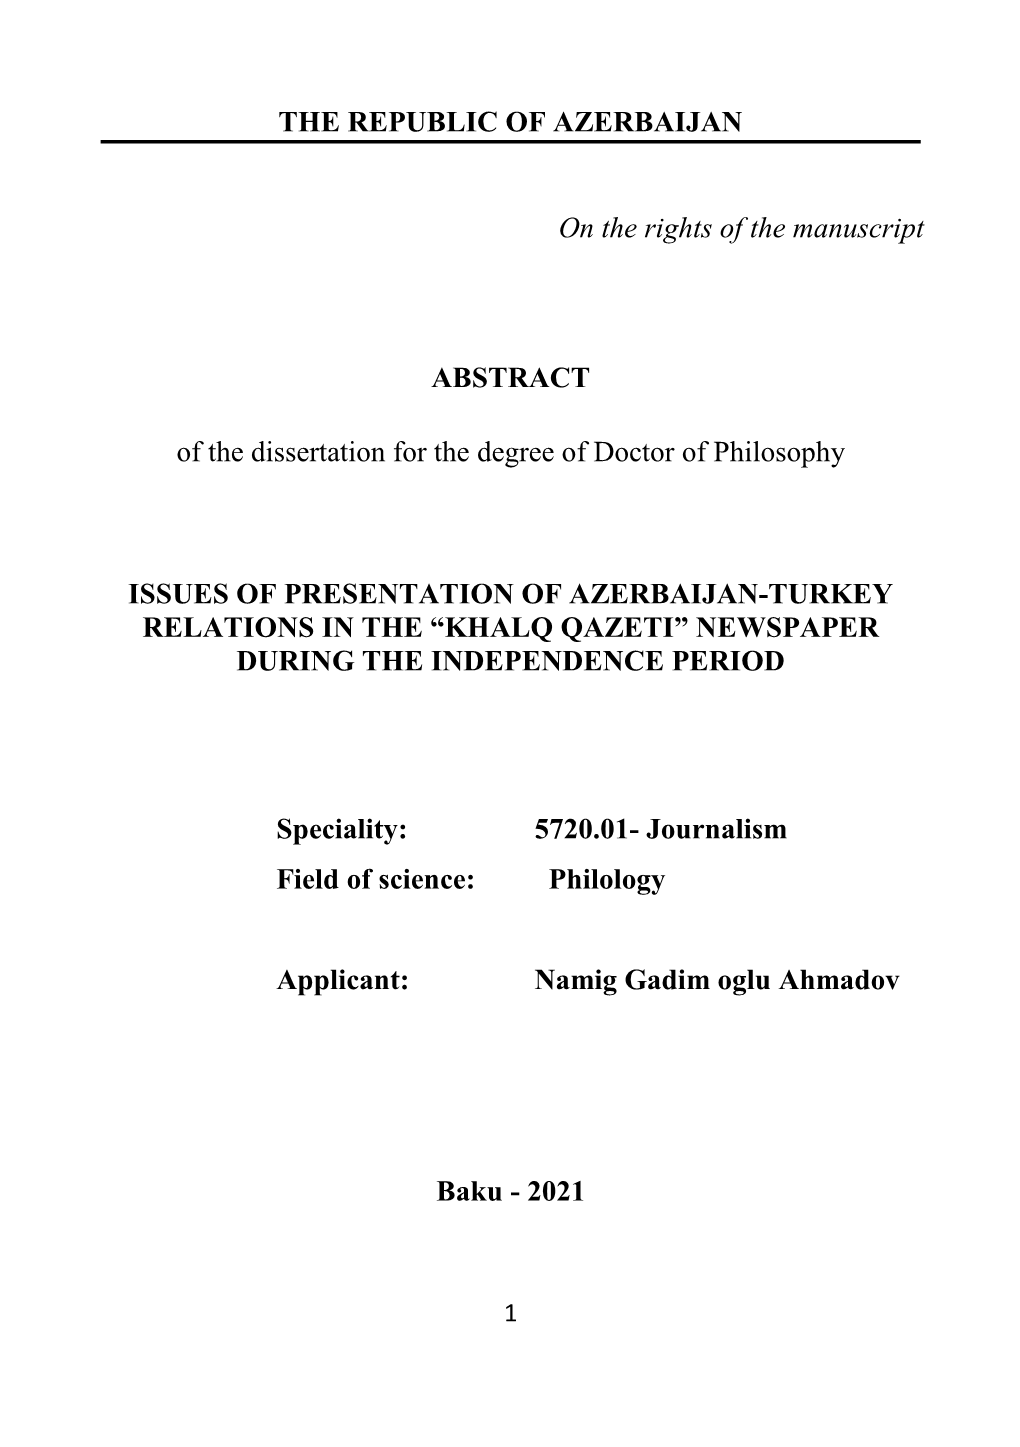 THE REPUBLIC of AZERBAIJAN on the Rights of the Manuscript